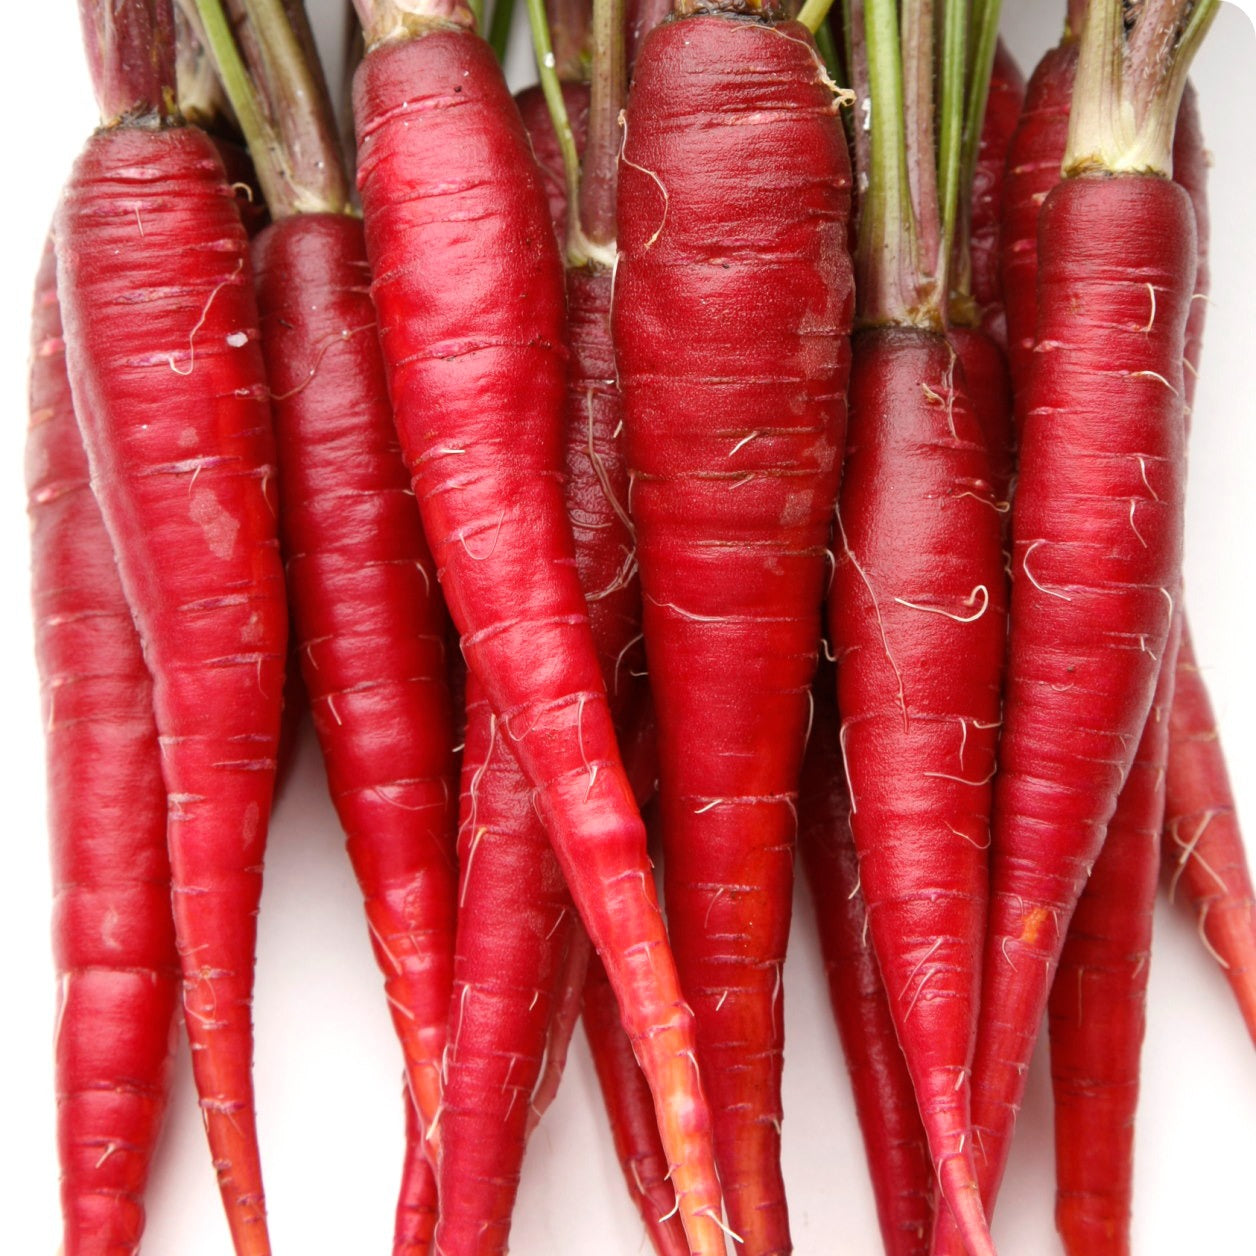 Atomic Red Carrot Seeds - Heirloom Untreated From Canada